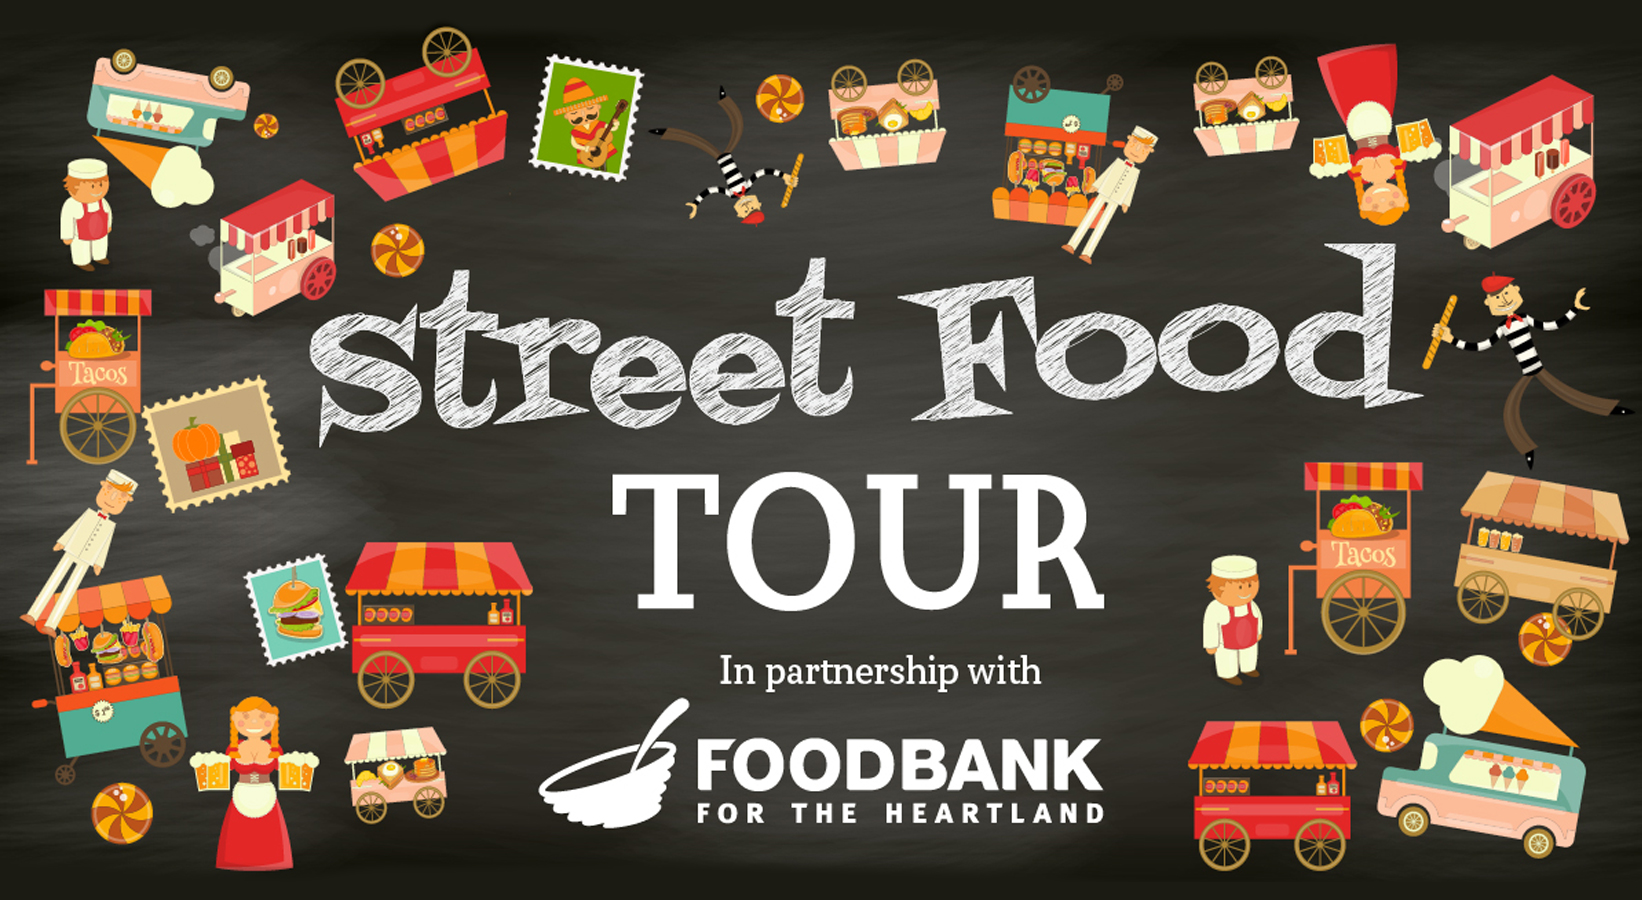 Midtown Crossing's Street Food Tour in partnership with Food Bank for the Heartland graphic with food stands, people, and food icons